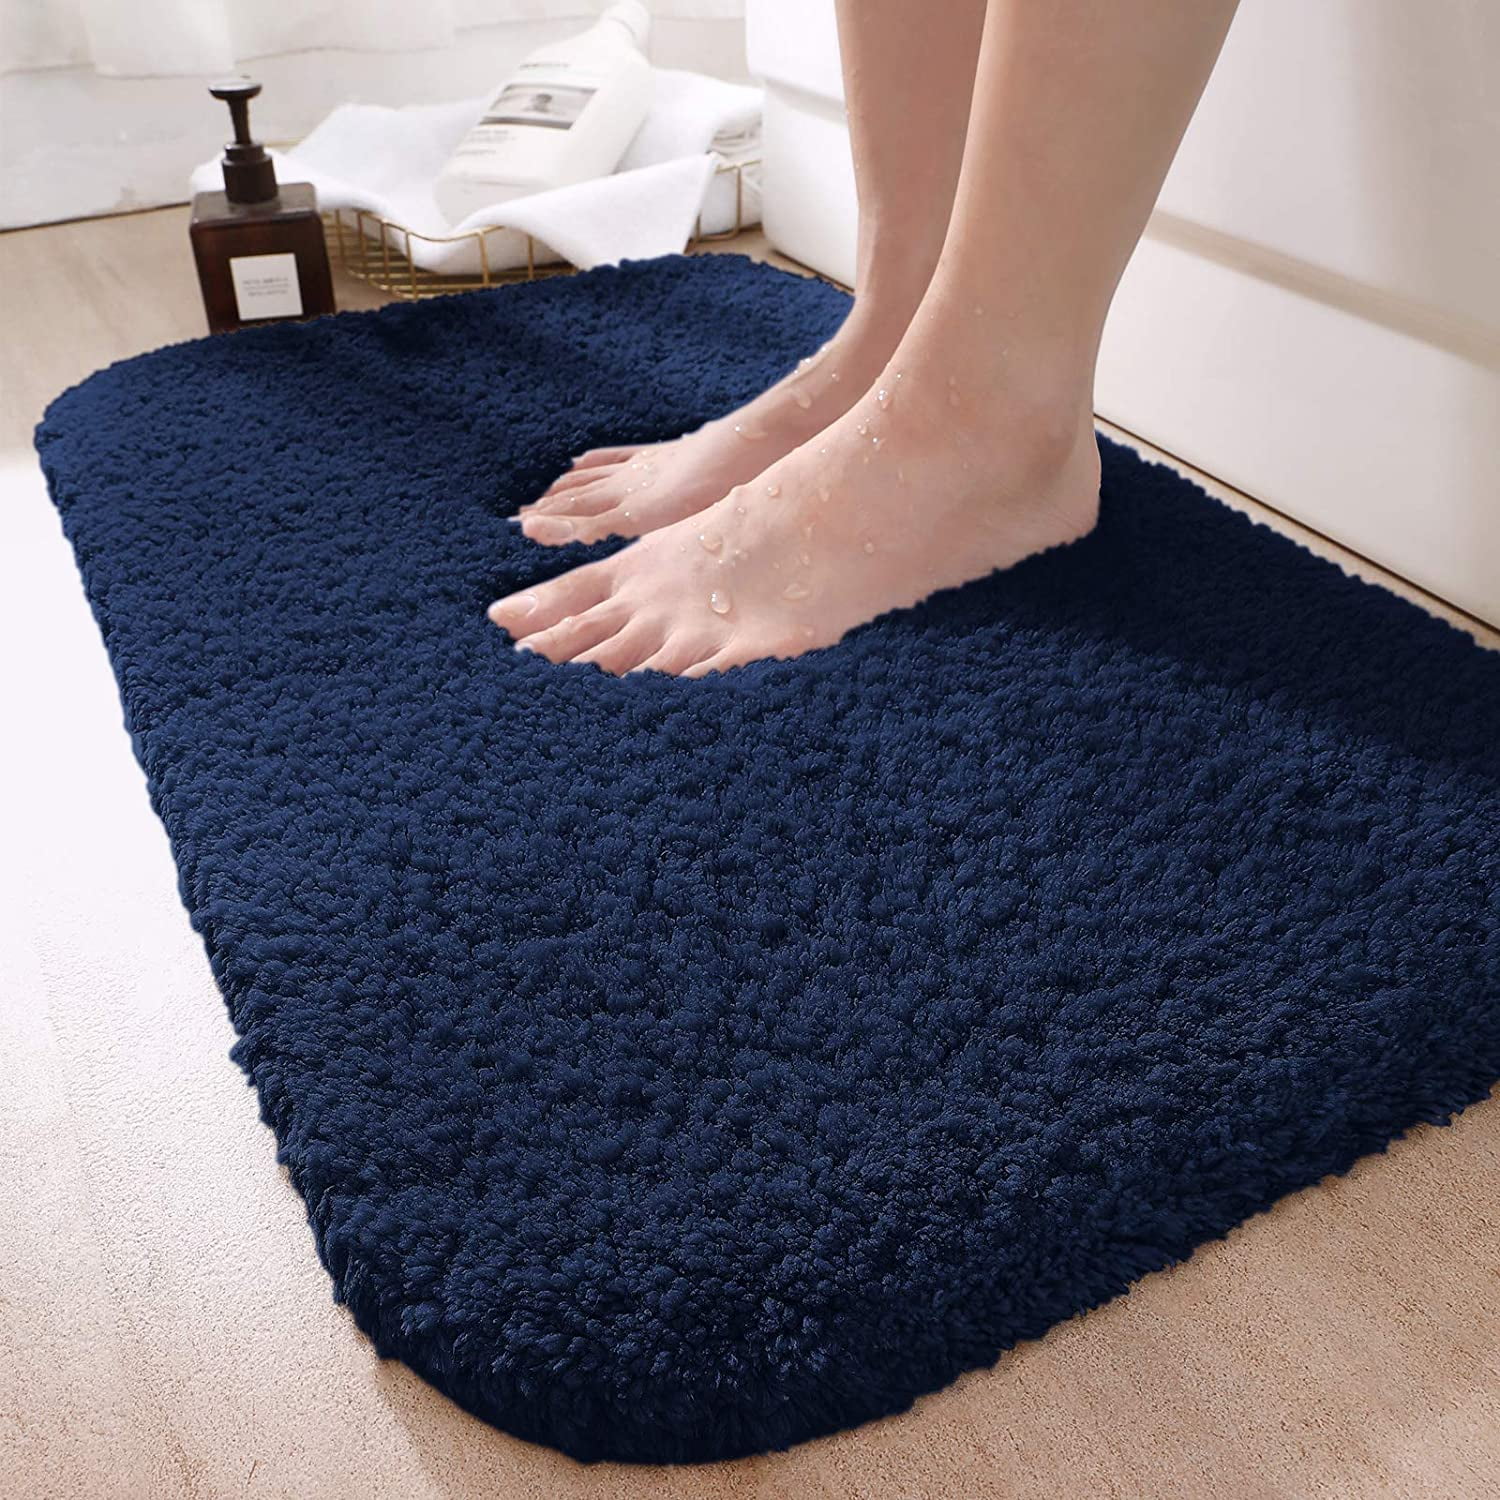 Bath Room Tub Bath Mats for Bathroom Non Slip Luxury Chenille Ultra Soft Bath Rugs 24x36 Absorbent Non Skid Shaggy Rugs Washable Dry Fast Plush Area Carpet Mats for Indoor Pure White